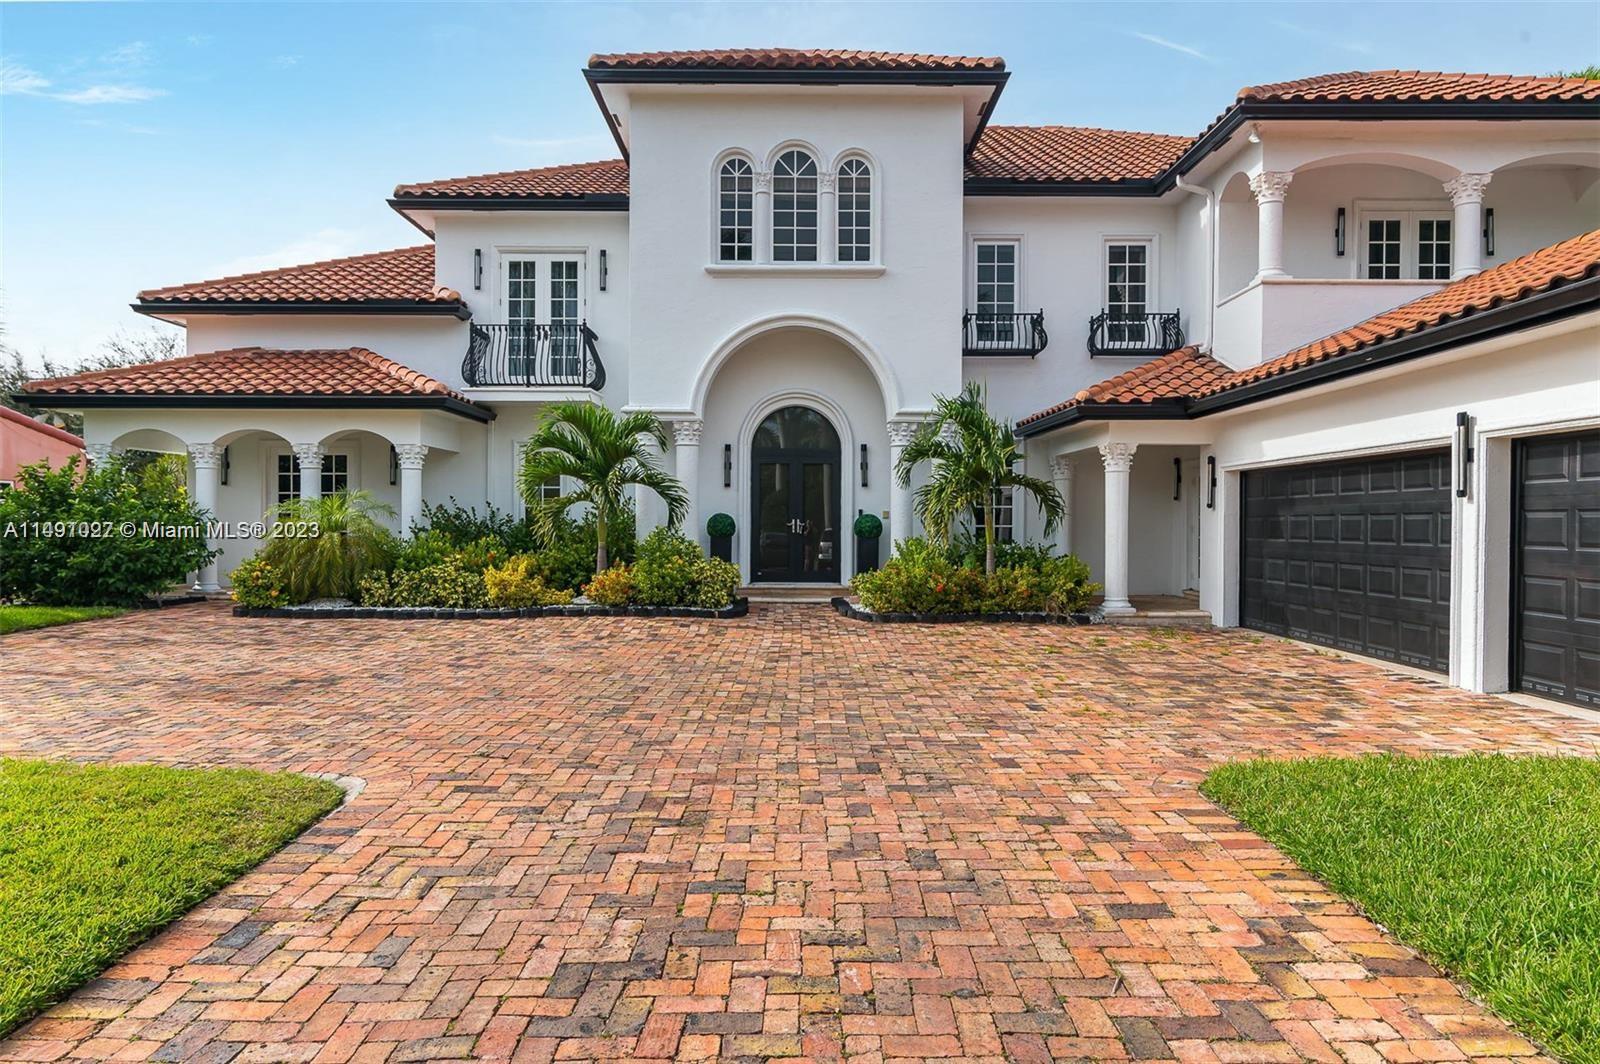 1309 Middle River Dr, Fort Lauderdale, Broward County, Florida - 7 Bedrooms  
8 Bathrooms - 